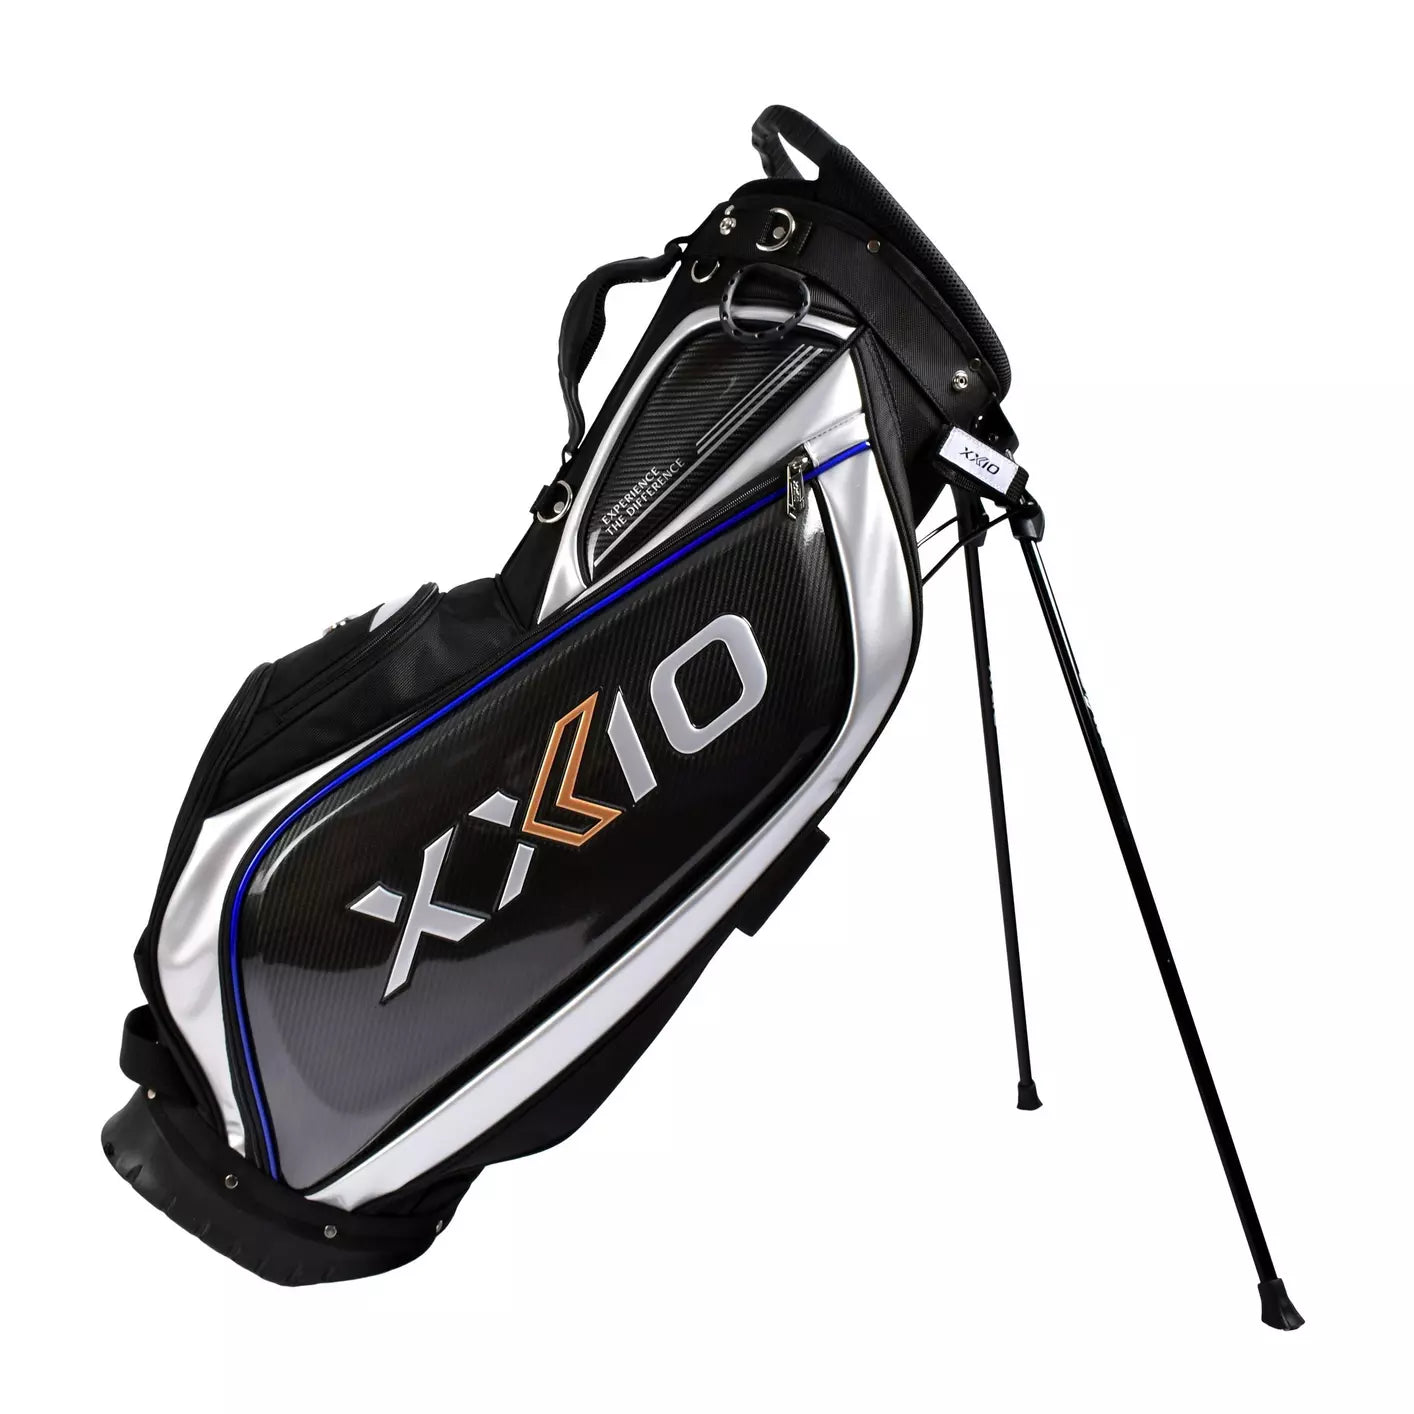 Bullet Golf .444 Premium Complete Club Set with Stand Bag - GolfEtail.com